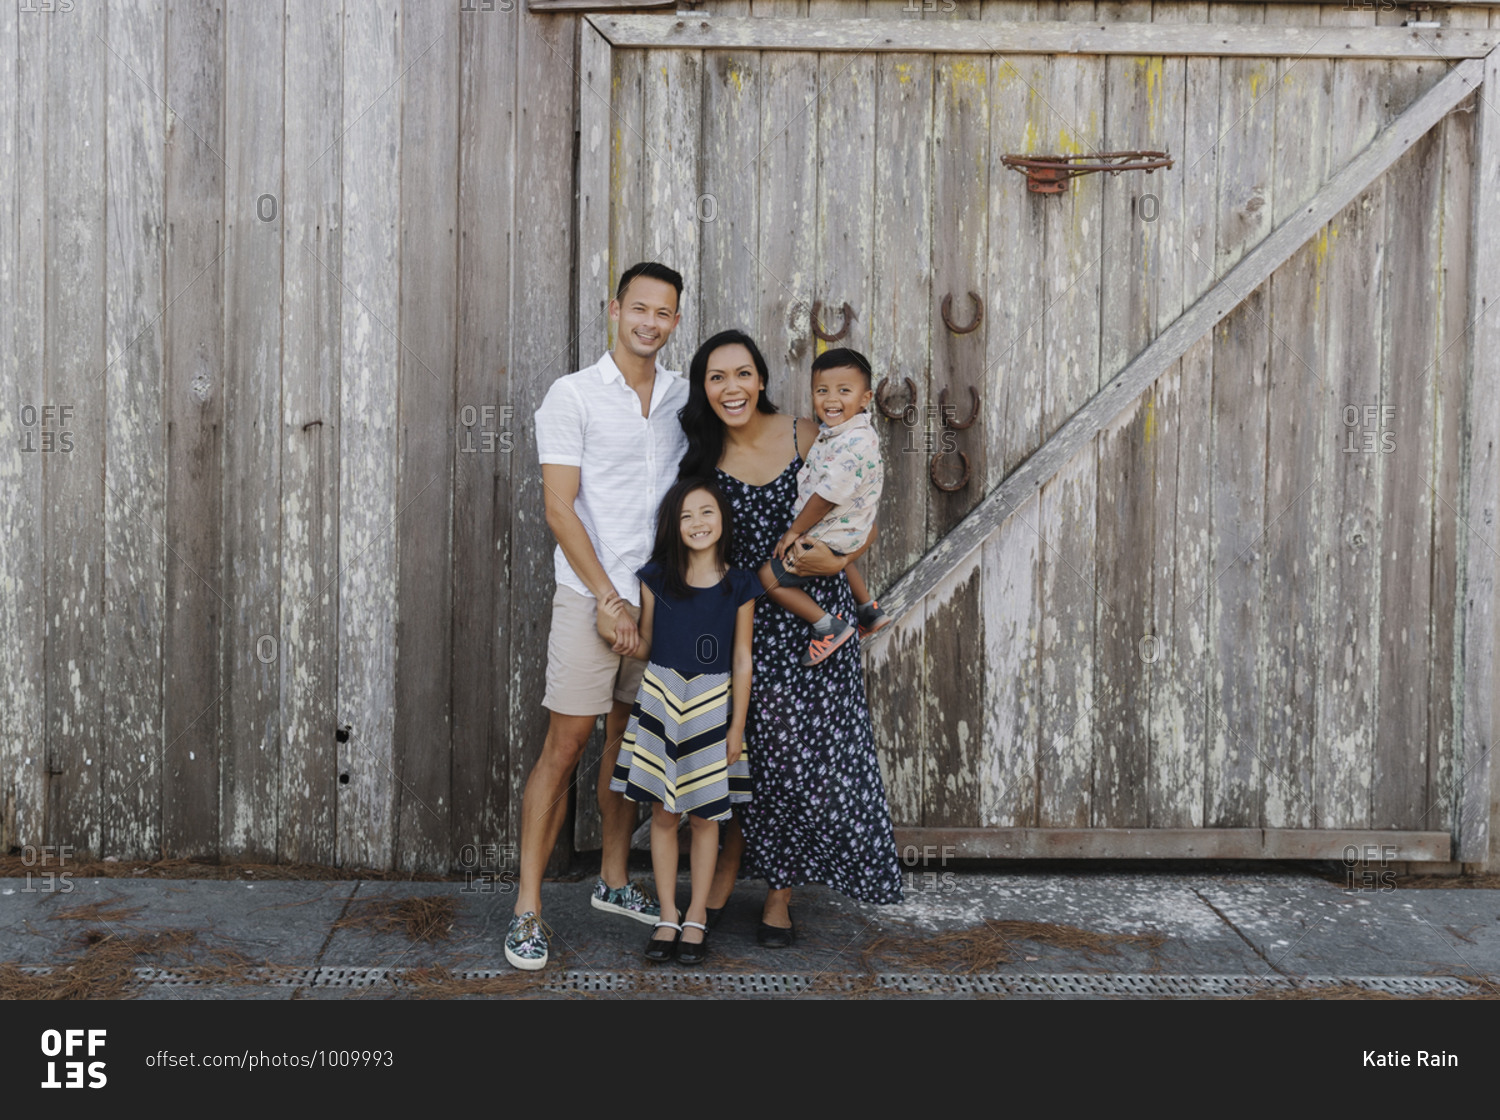 Portrait of a beautiful family standing together in front of an old wooden barn